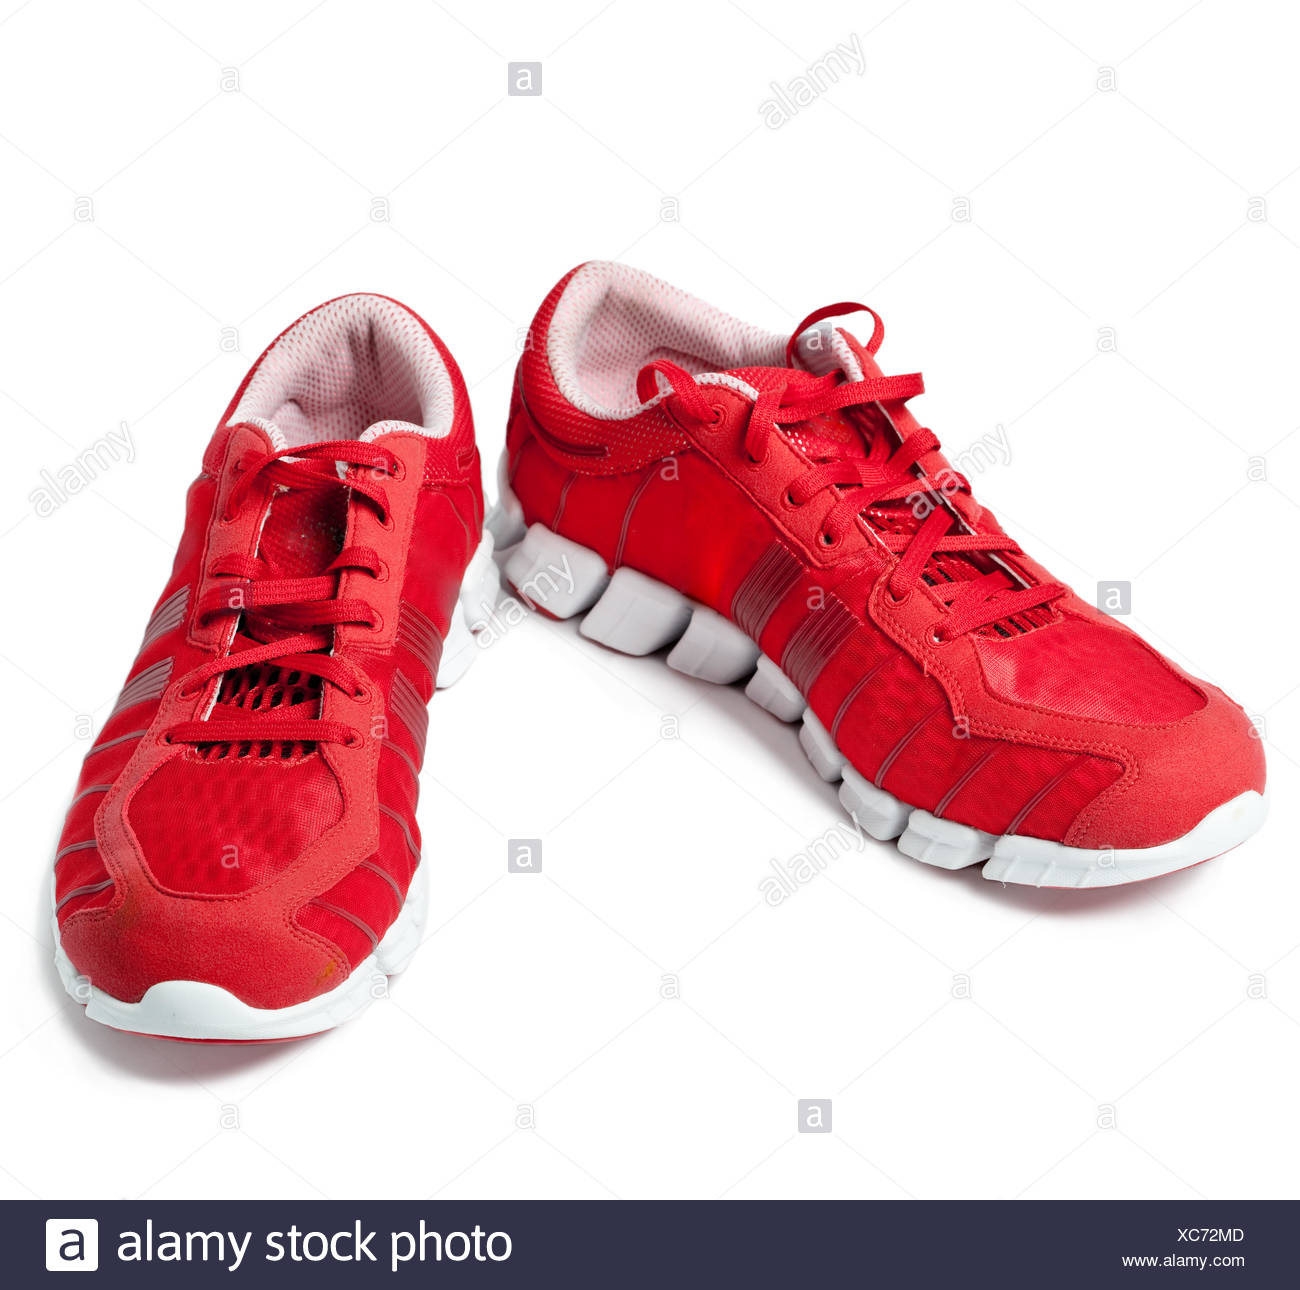 Trainers Stock Photos & Trainers Stock Images - Alamy